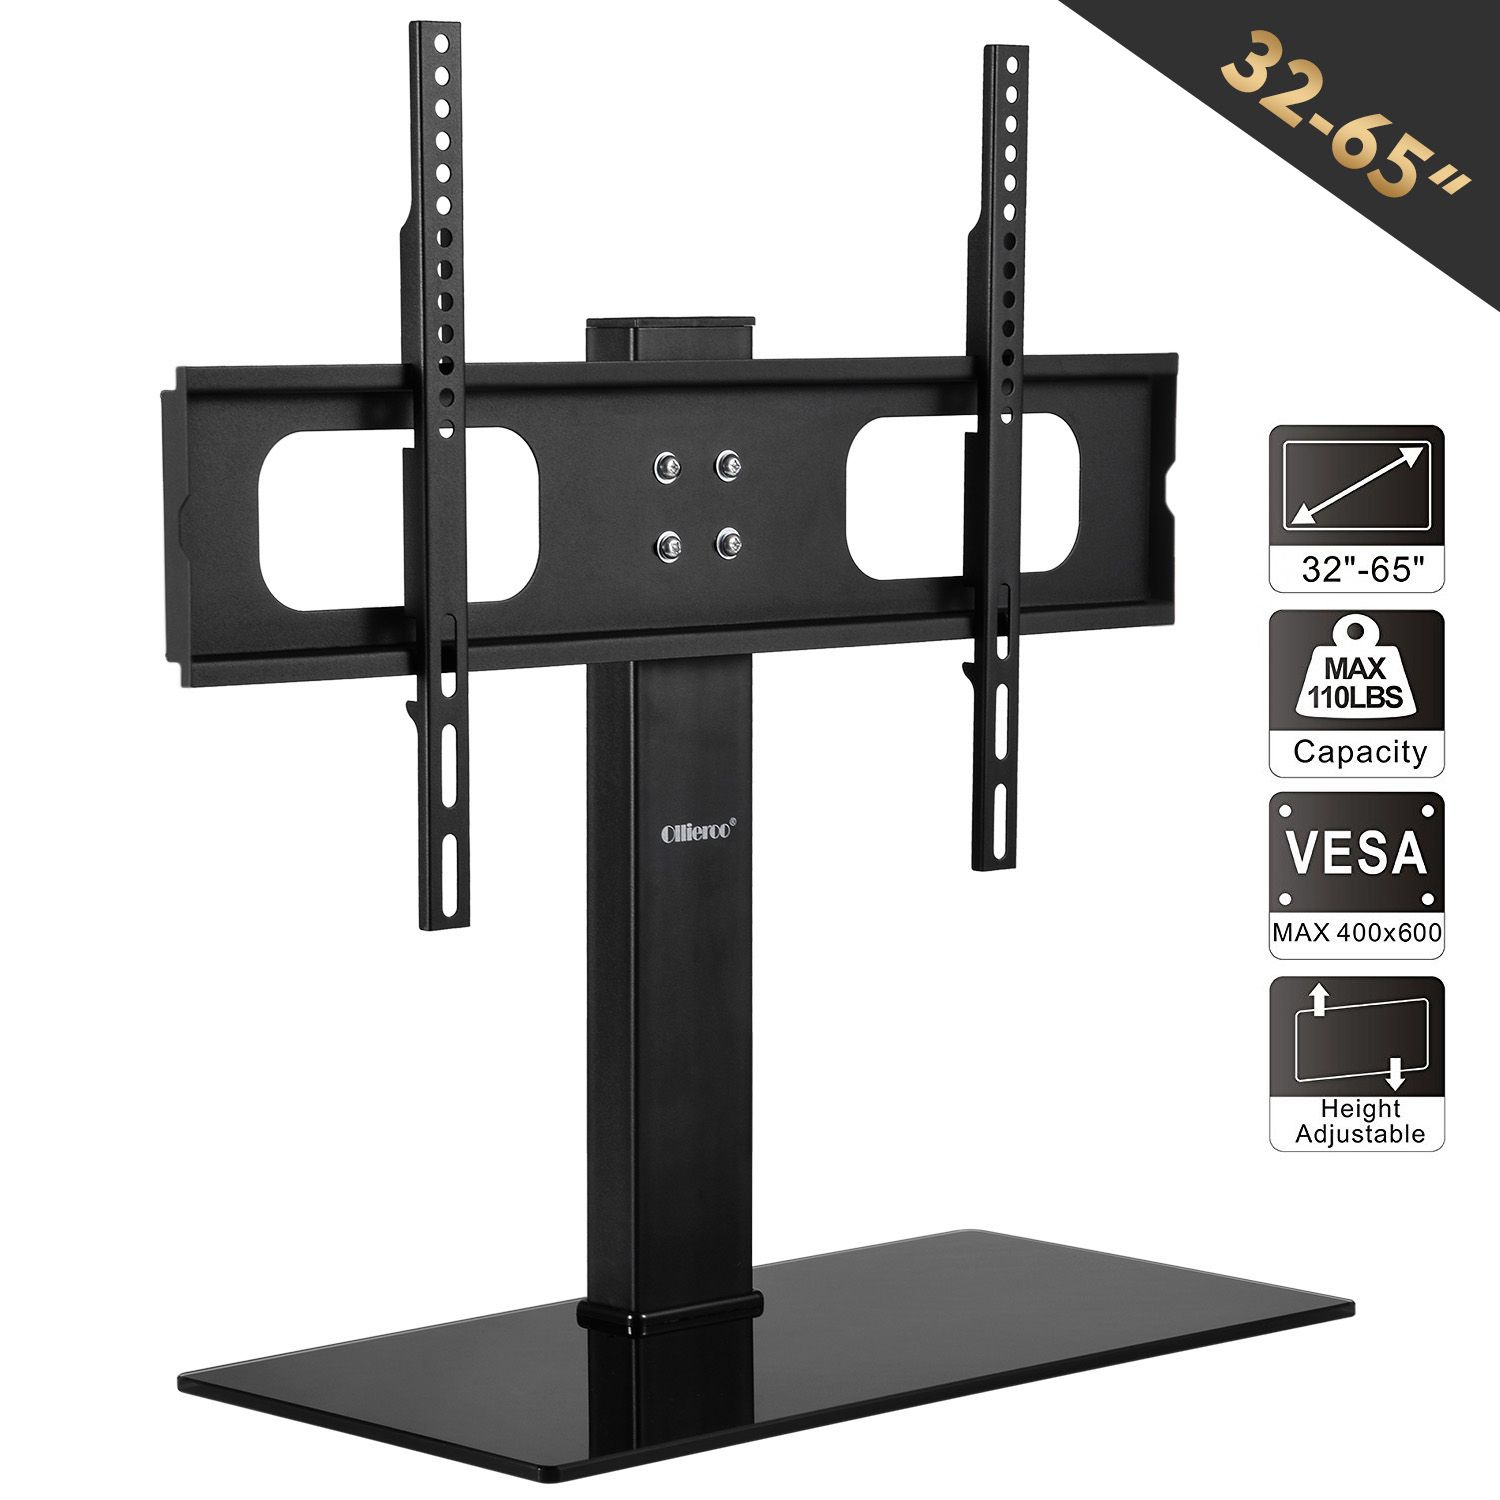 Universal Tabletop Tv Stand Base For 32 65 Inch Lcd Led Throughout Paulina Tv Stands For Tvs Up To 32" (View 7 of 15)